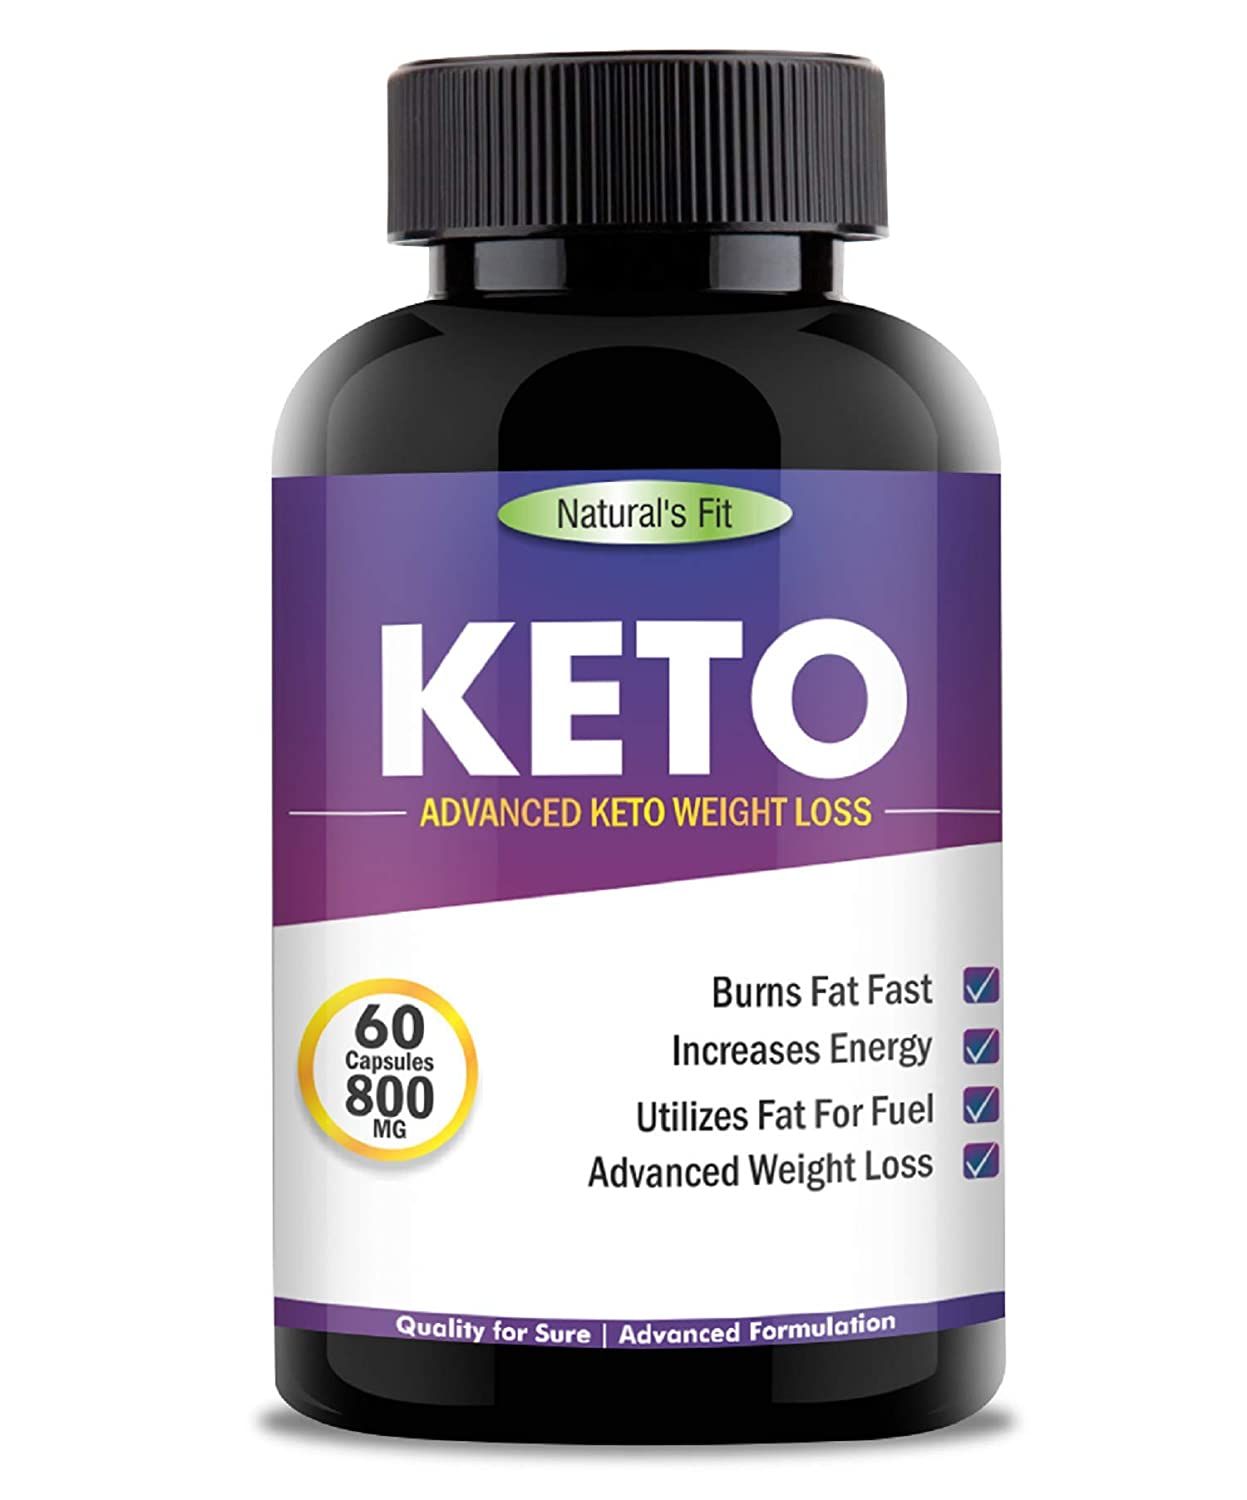 Natural's Fit Keto Advanced Weight Loss Supplement Image